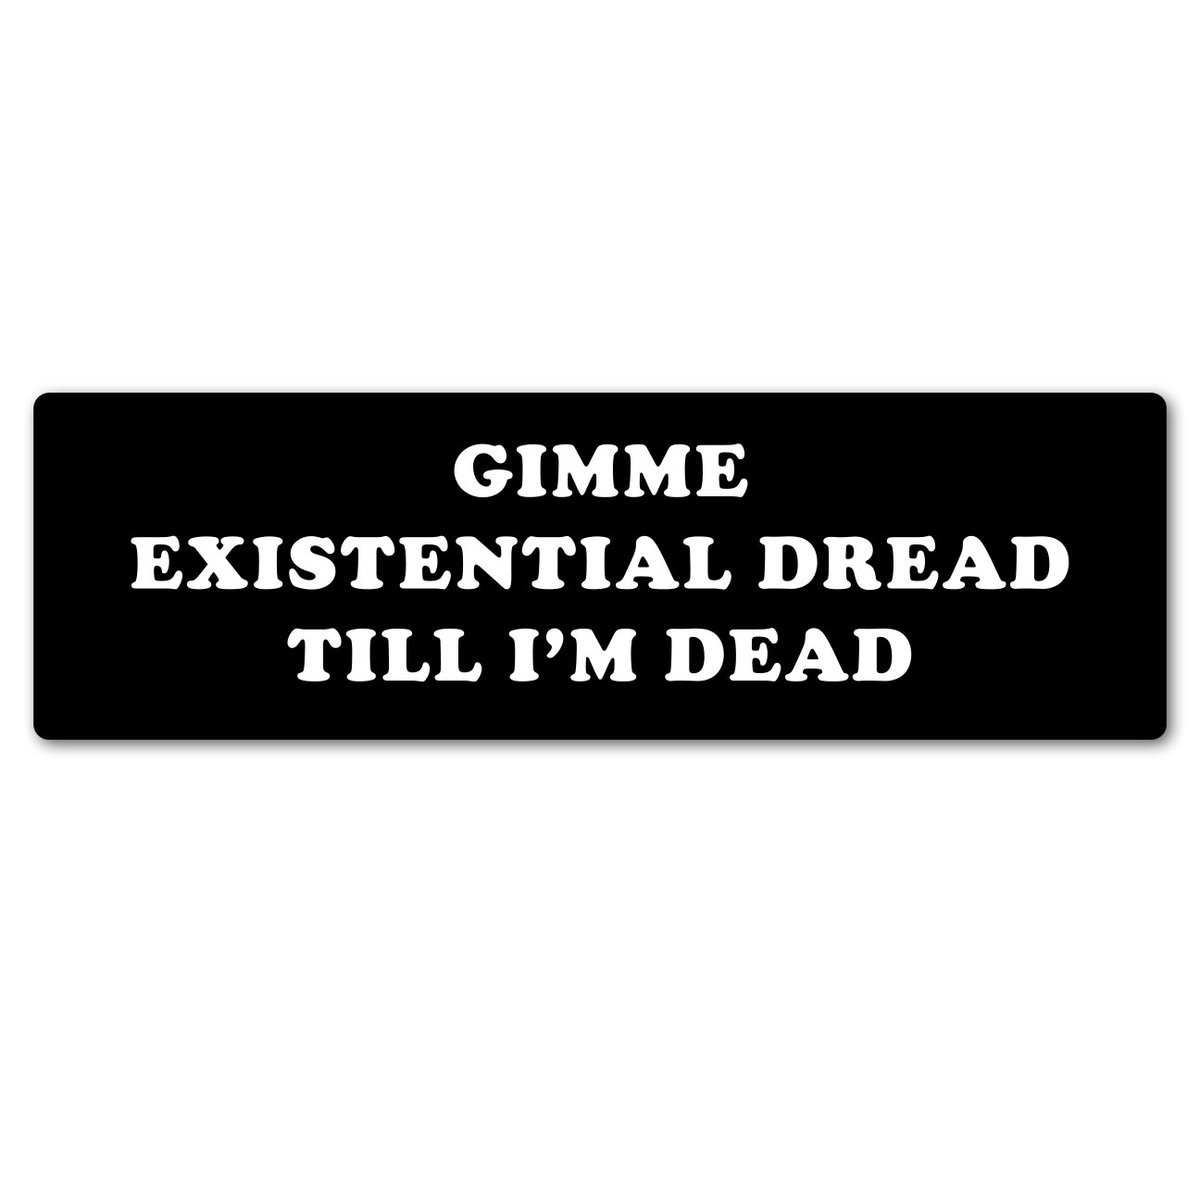 Image of Gimme Existential Dread Till I'm Dead Large Sticker